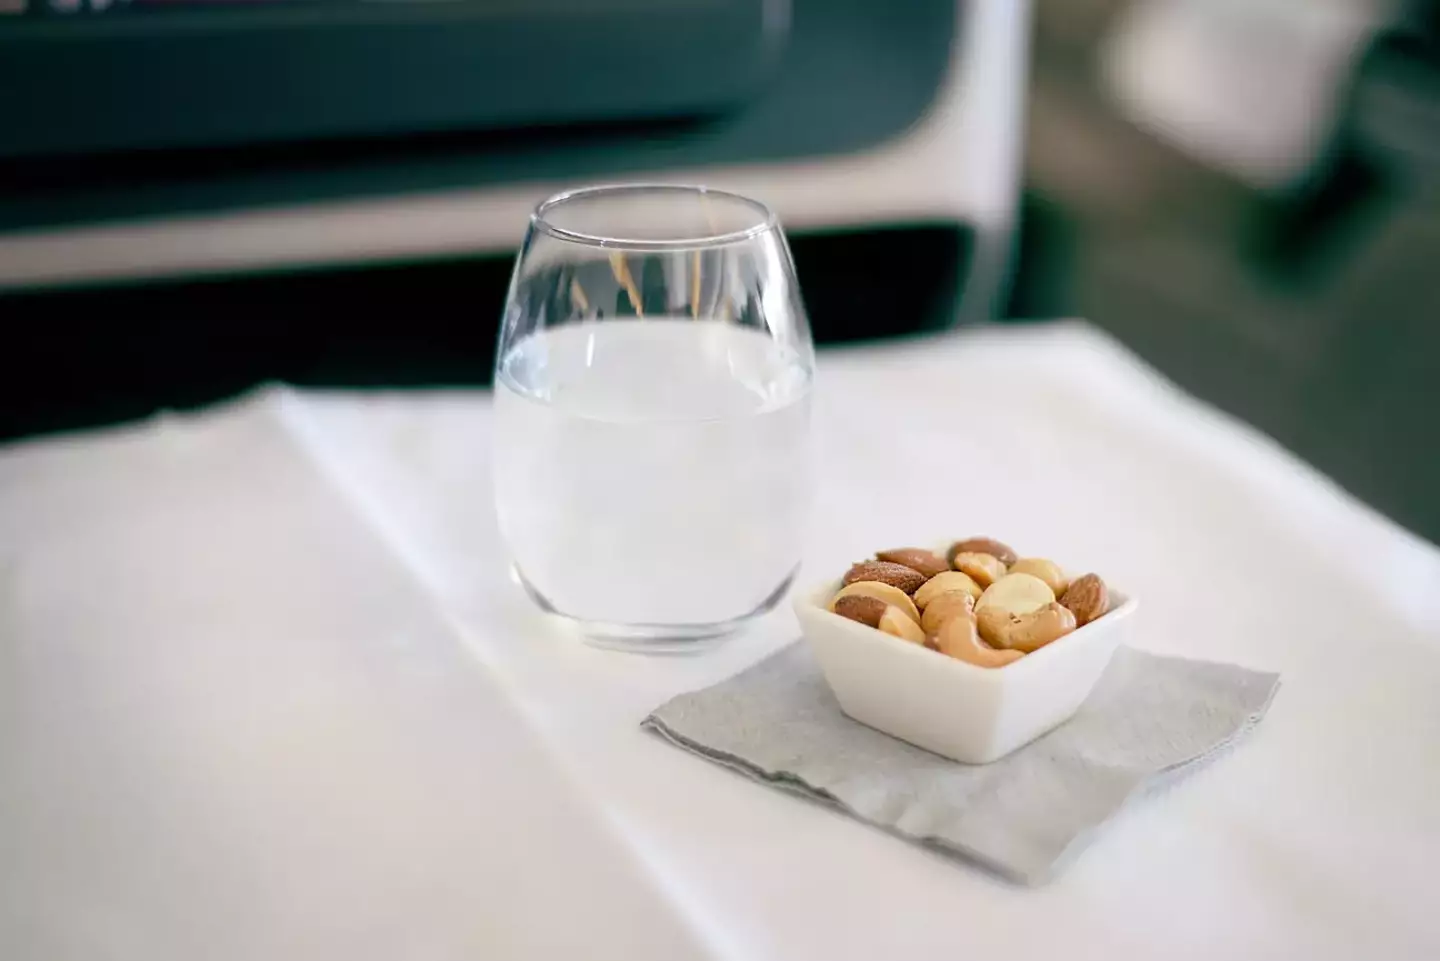 A little pack of nuts is a popular plane snack.